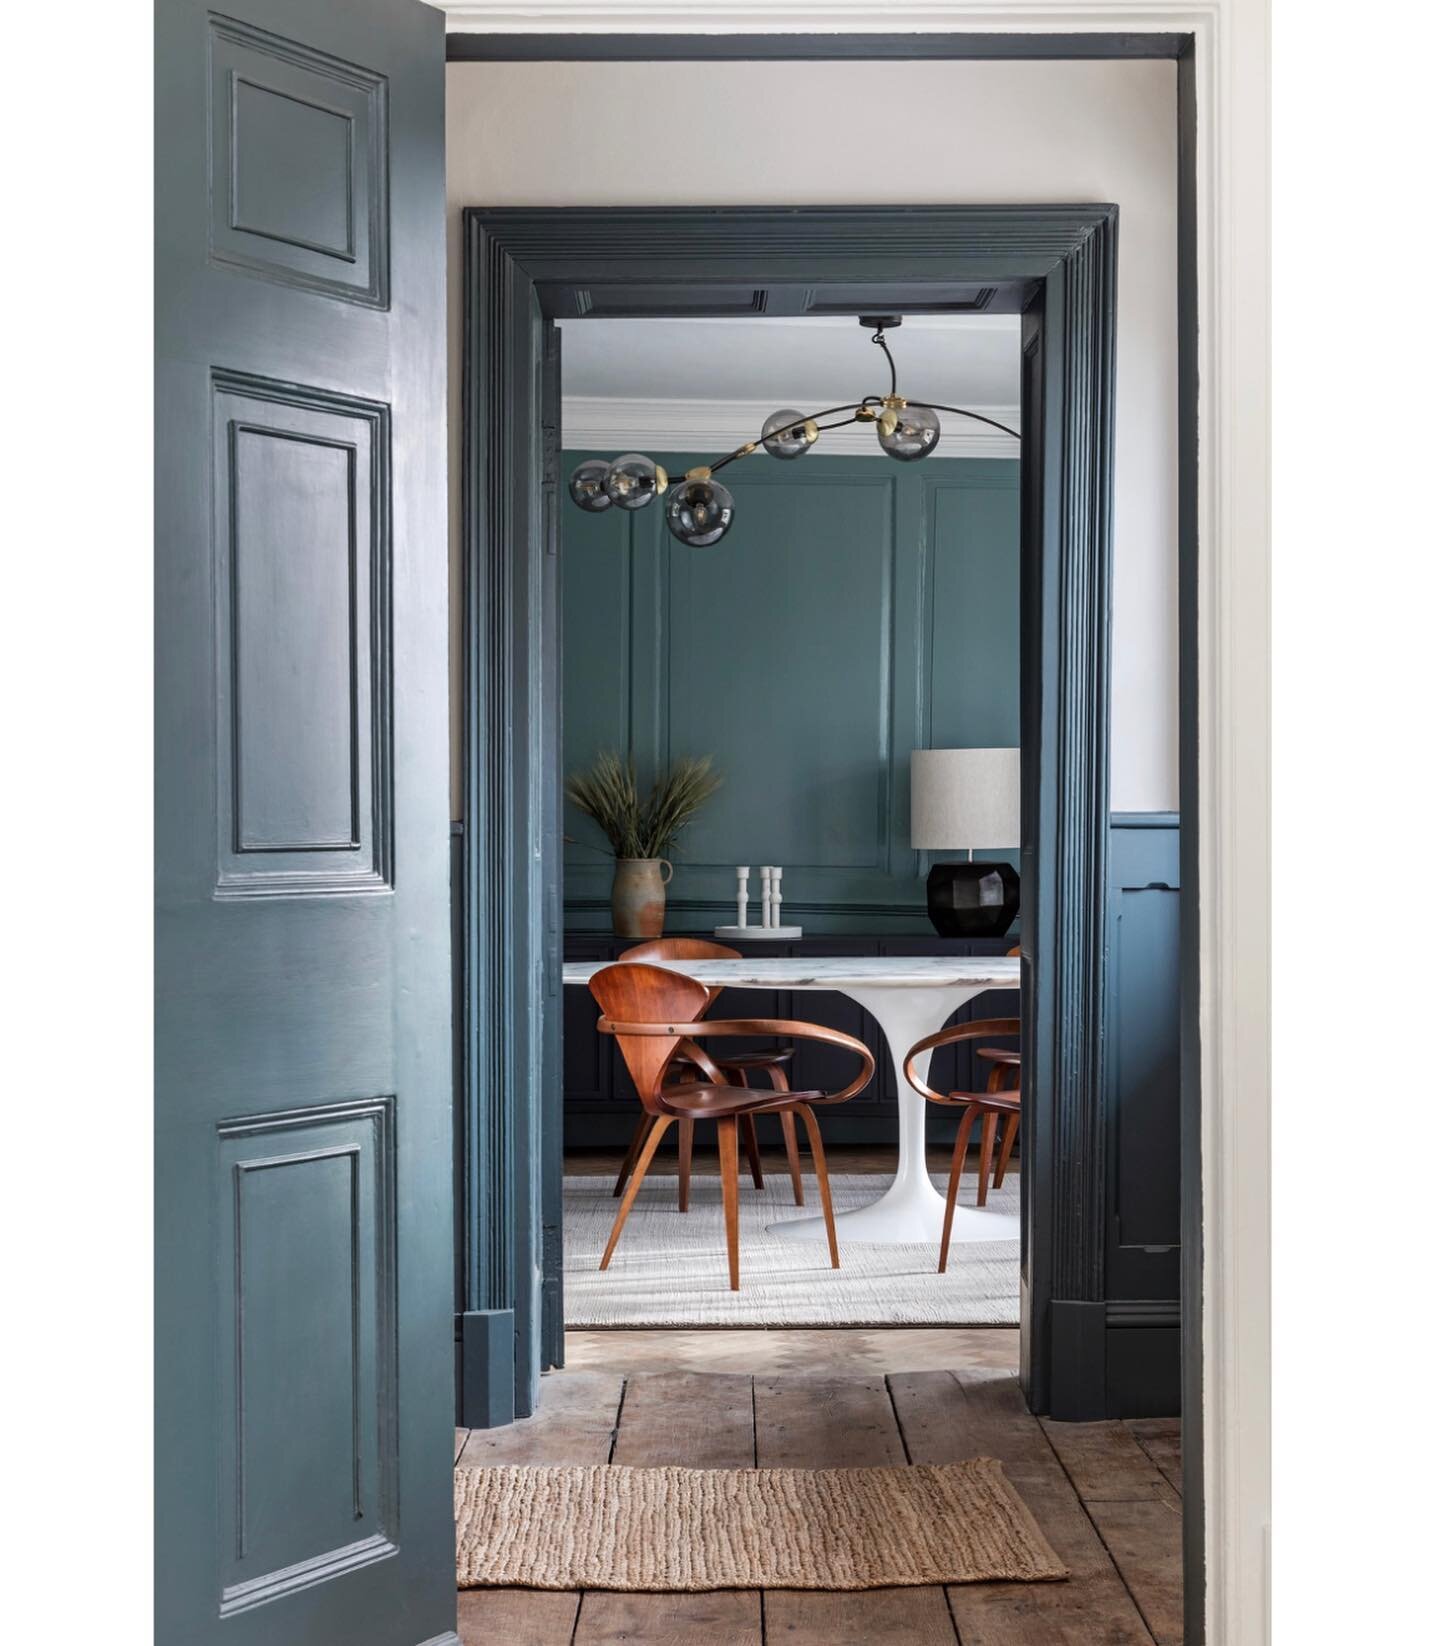 Interior design for this listed family home in Oxfordshire countryside from @louiseholtdesign with architects @andersonorrarchitects 📷@AndrewBeasleyphoto Wall colour is Oval Room Blue from @farrowandball #interiordesign #wallpanelling #diningroom #c